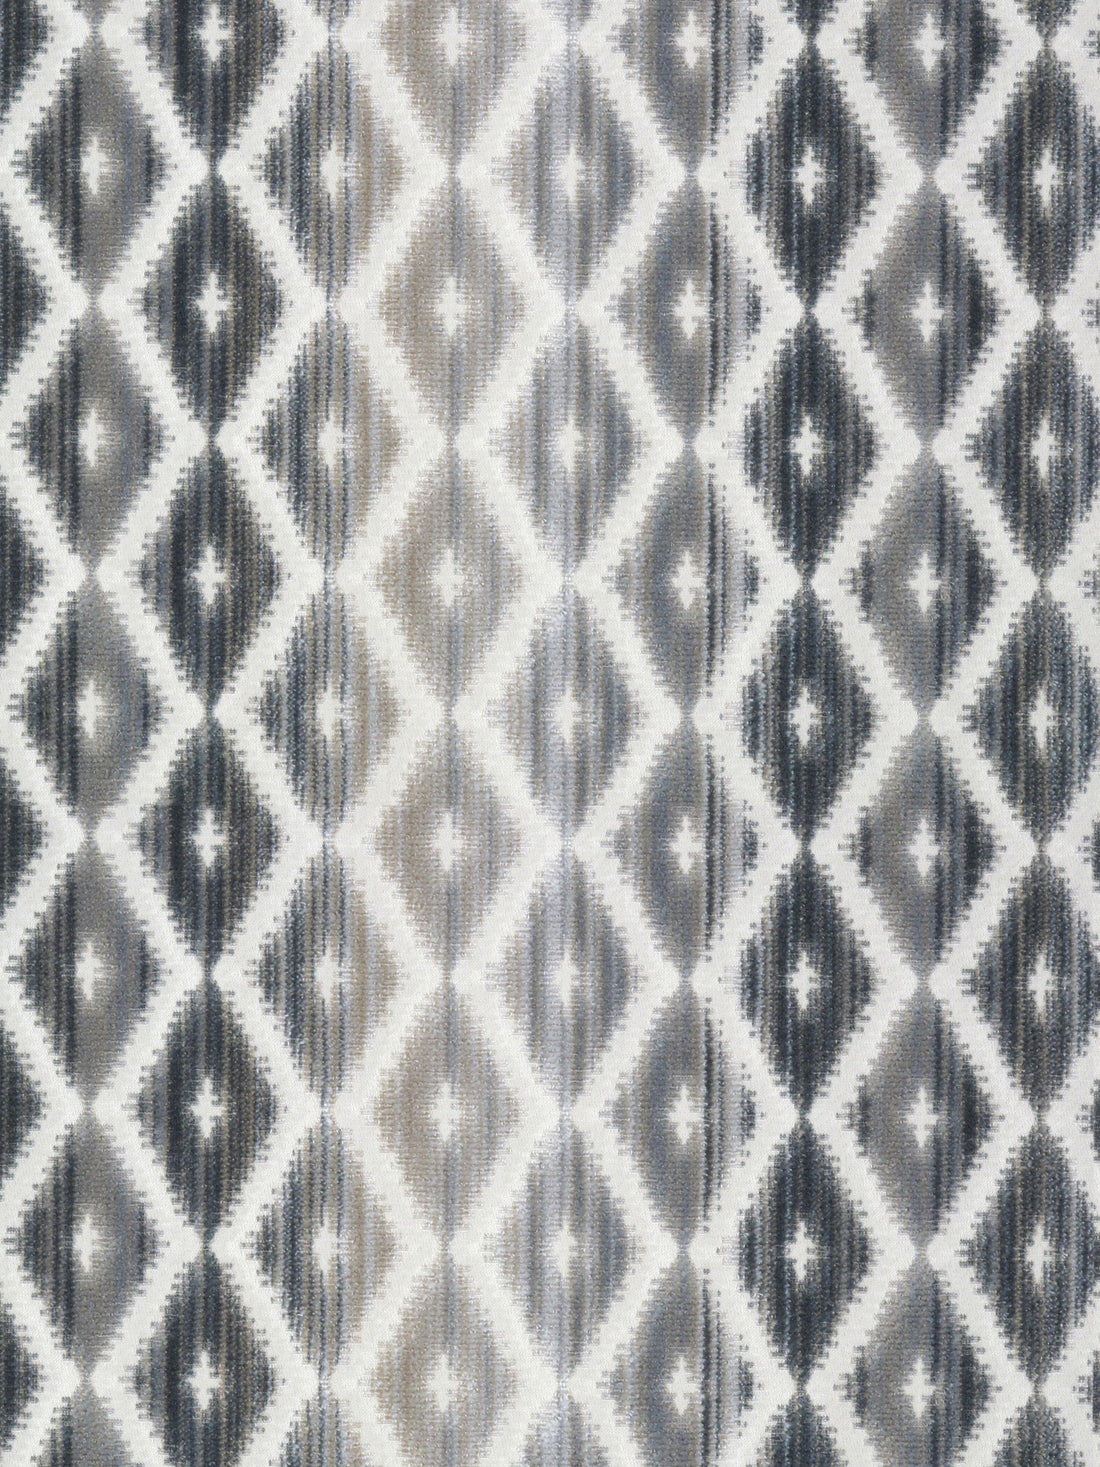 Diamantina fabric in harbor mist color - pattern number SI 00061316 - by Scalamandre in the Old World Weavers collection